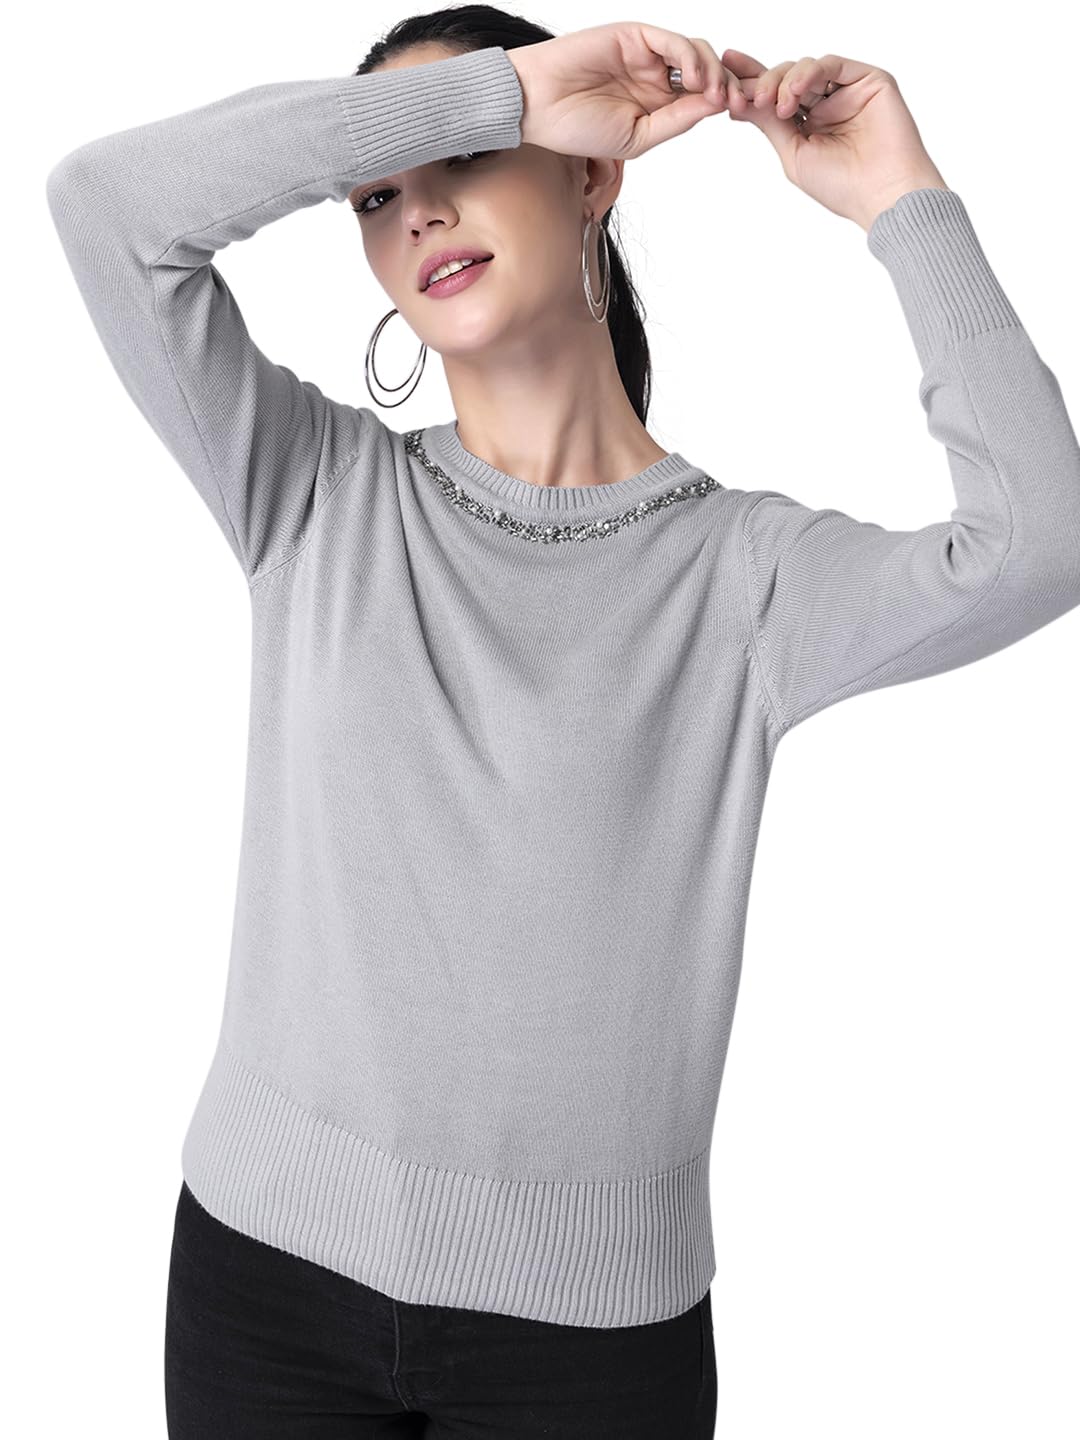 FabAlley Women's Viscose Rayon Round Neck Sweater (SWT00403_Grey_M) 